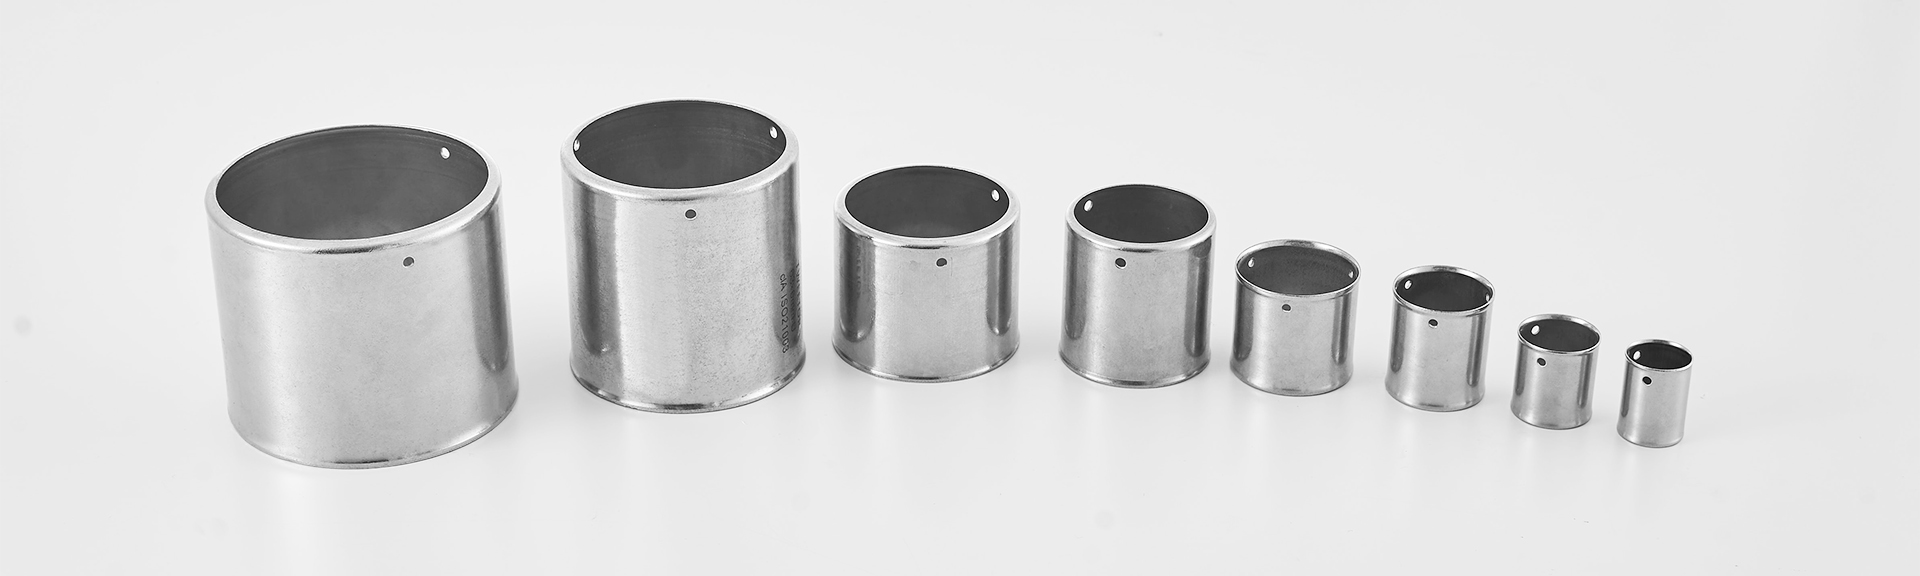 What You Need to Know About Leader Pins and Bushings | Plastics Technology